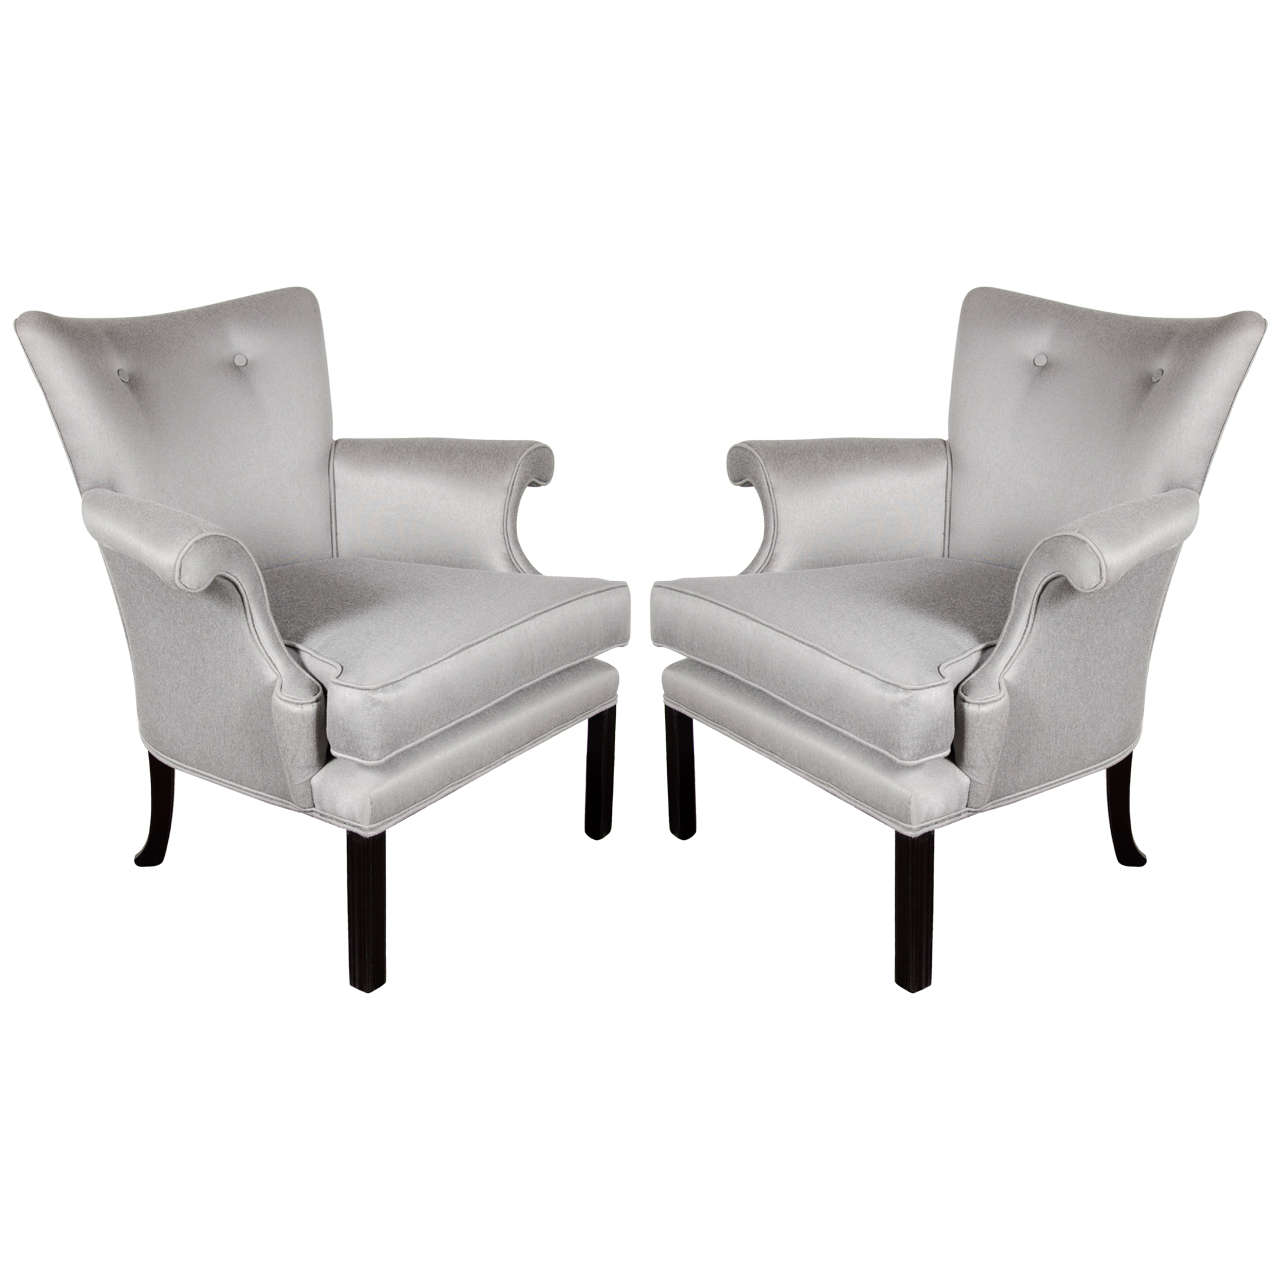  Pair of Hollywood Scroll Form Arm Chairs in Platinum Sharkskin